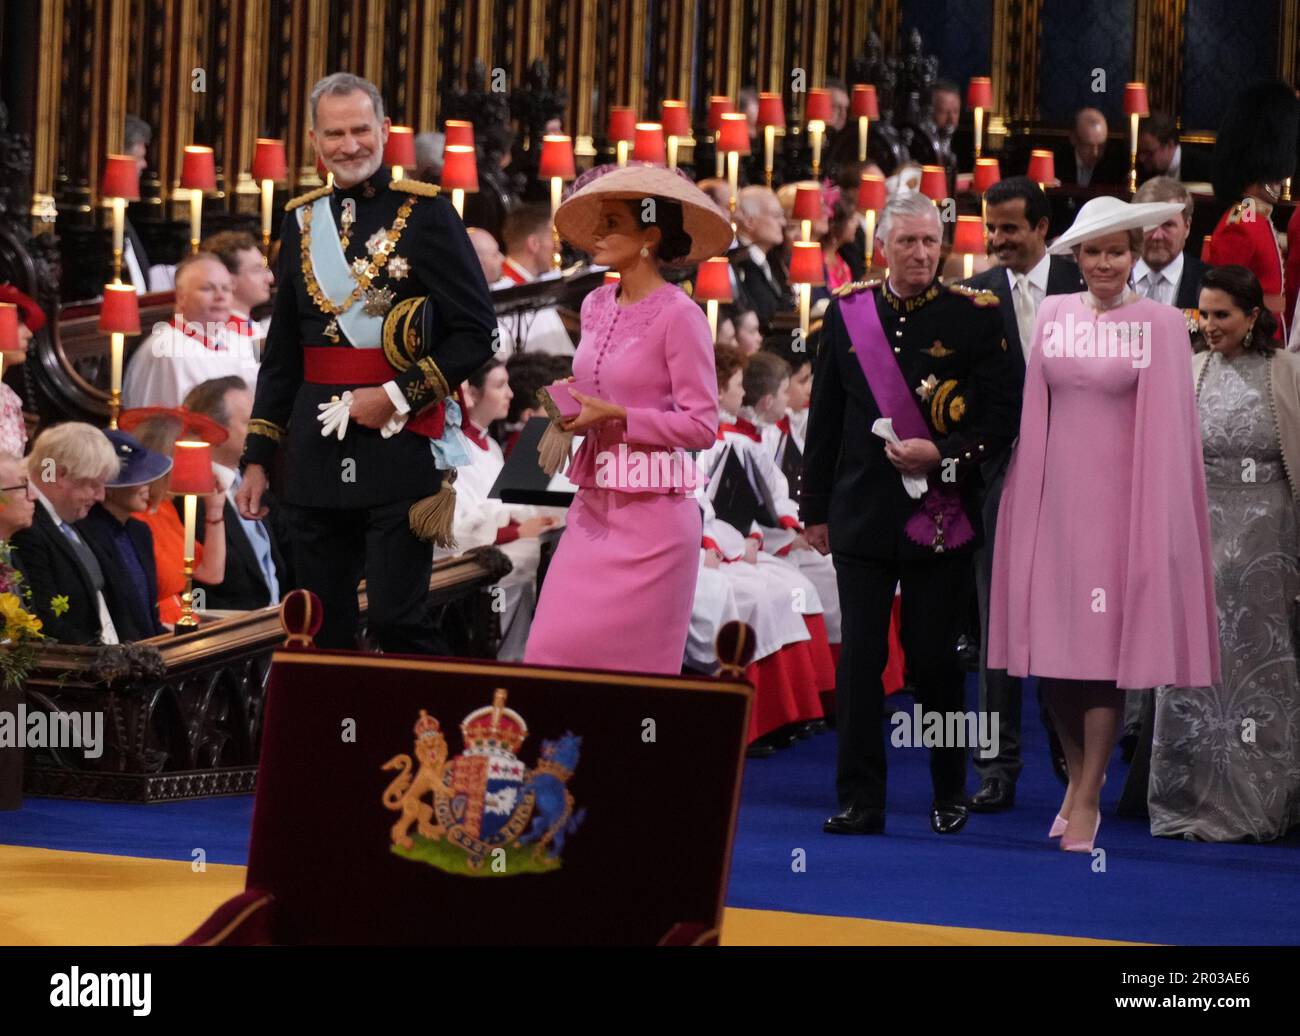 (left to right) King Felipe VI and Queen Letizia of Spain, and King Willem-Alexander and Queen Maxima of the Netherlands l arrive at the coronation ceremony of King Charles III and Queen Camilla in Westminster Abbey, London. Picture date: Saturday May 6, 2023. Stock Photo